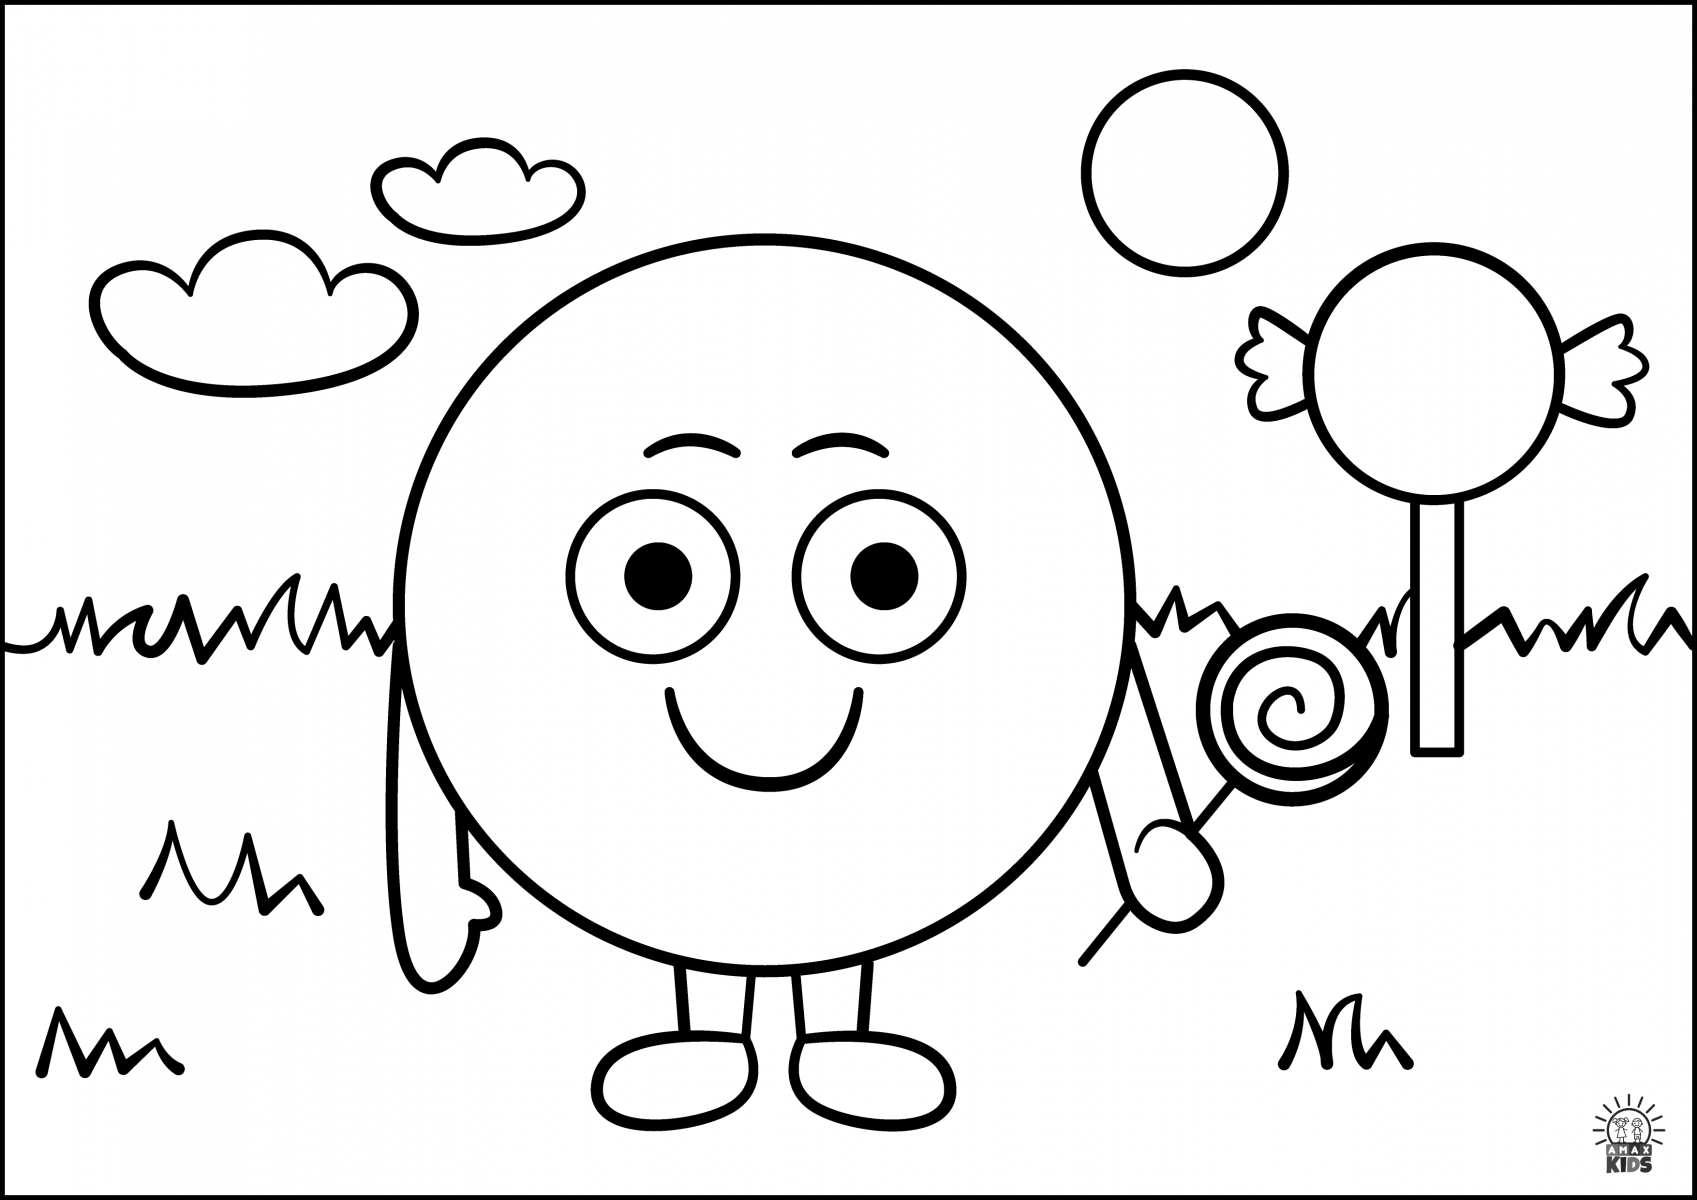 Coloring pages for kids – Shapes | Amax Kids